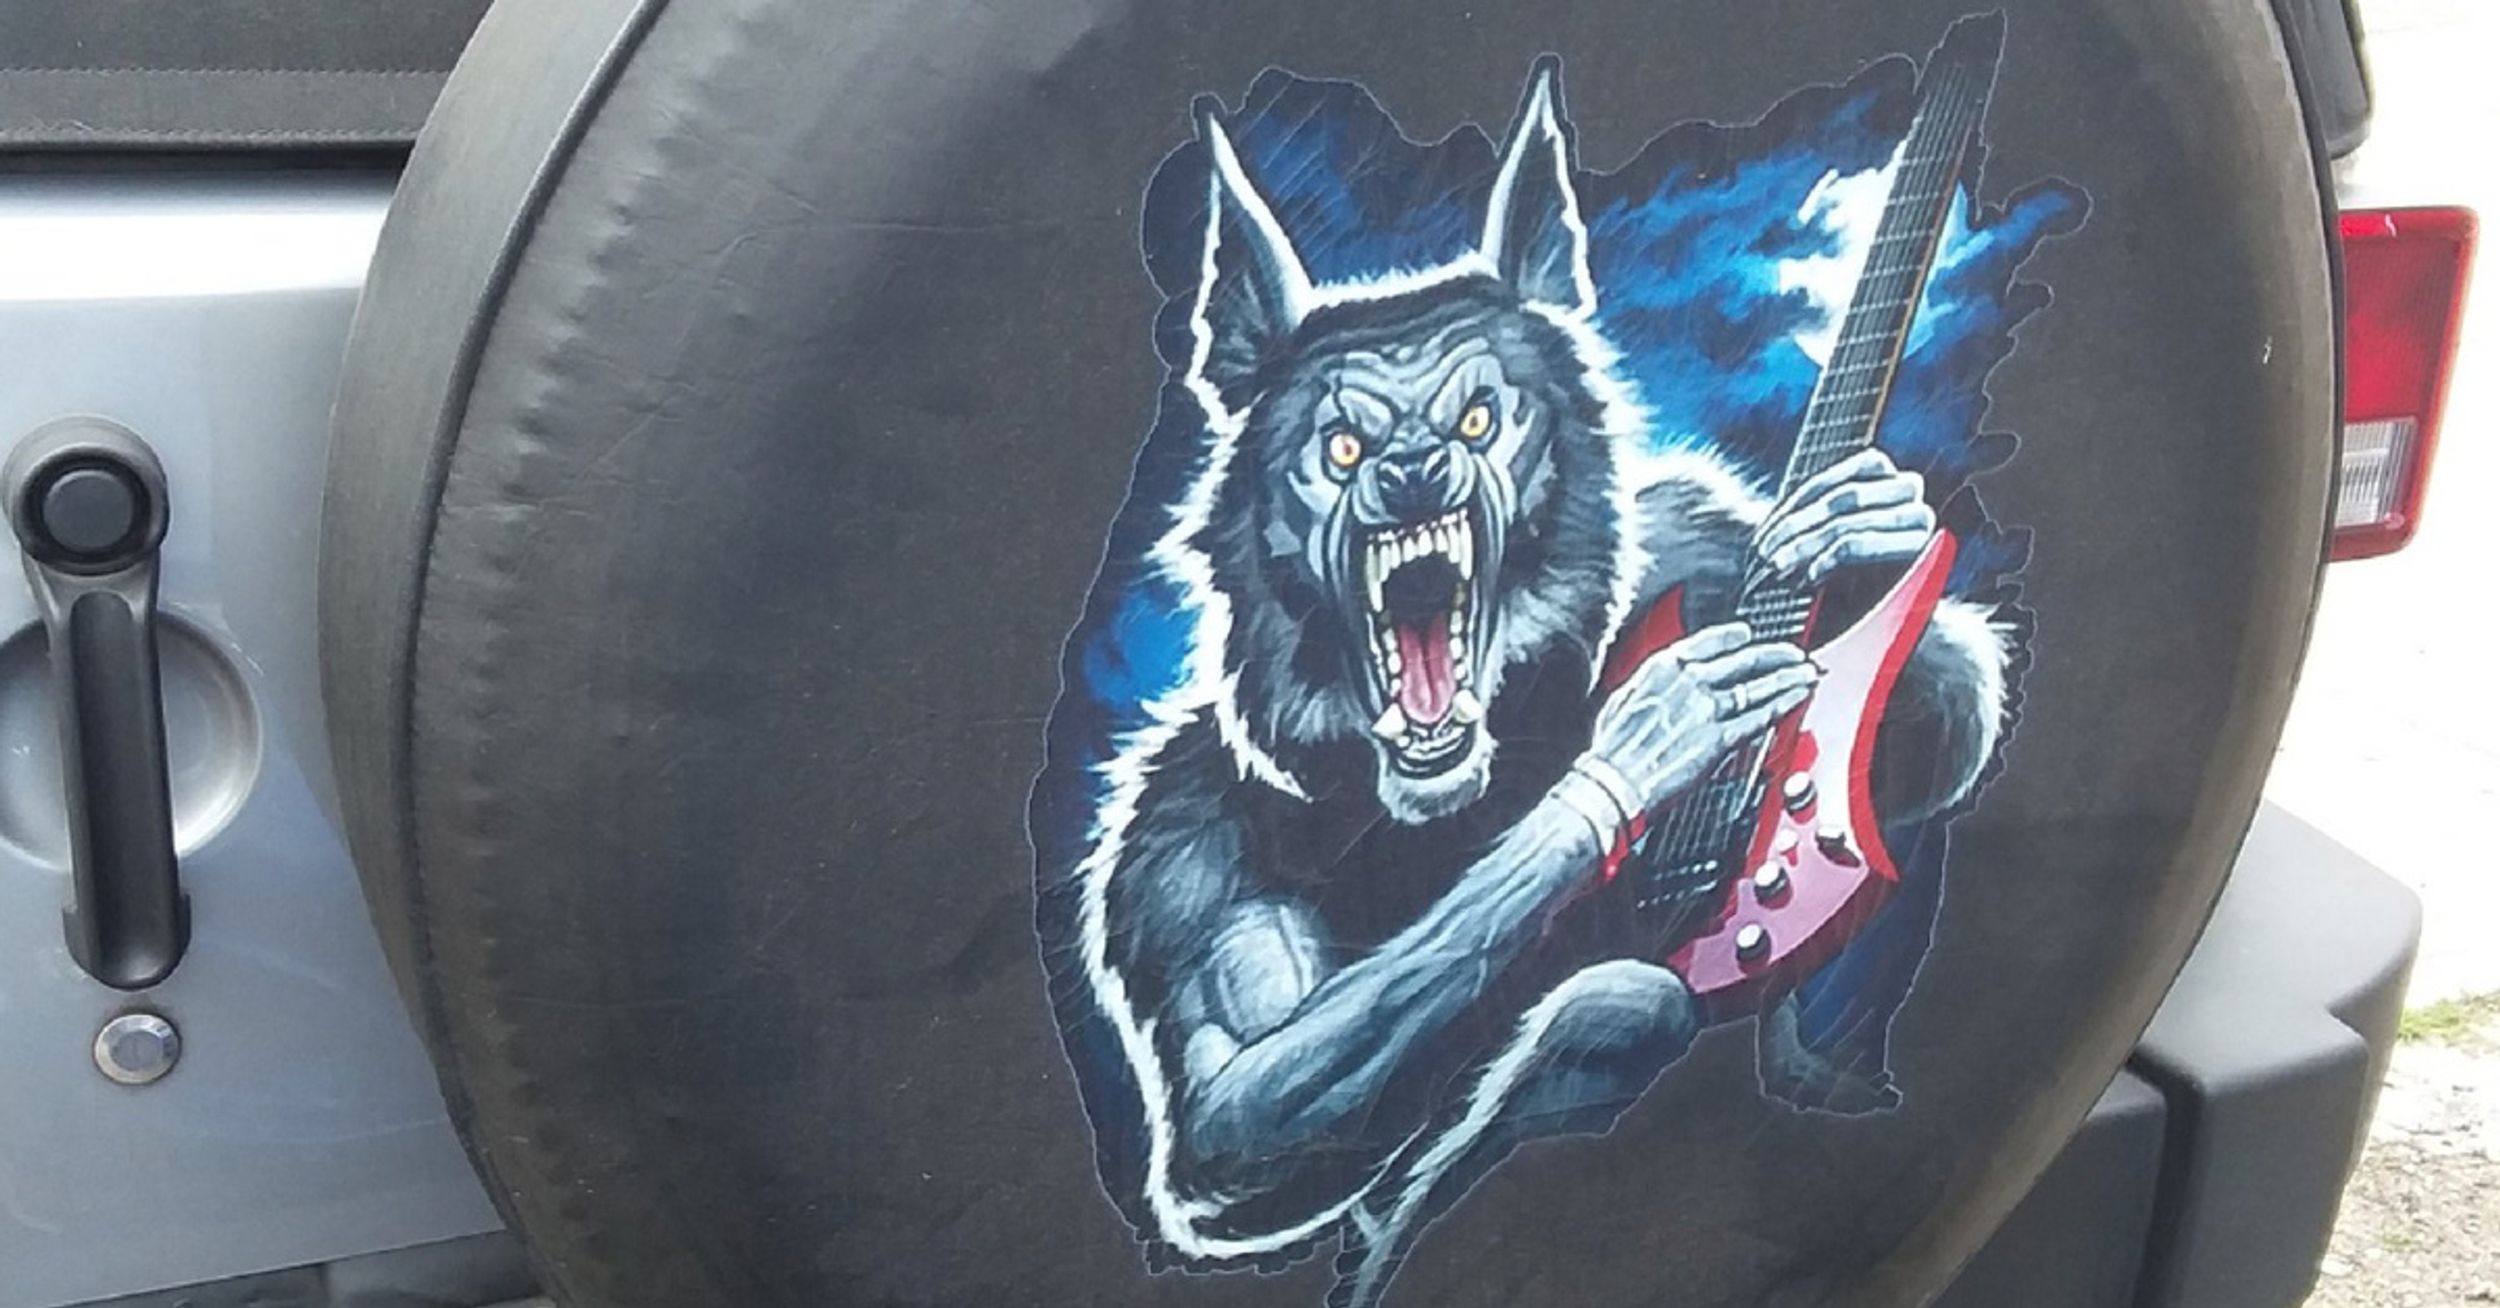 This Bizarre Decal Of A Wolf Playing A Guitar Gets Even Better Upon Closer Inspection 😂